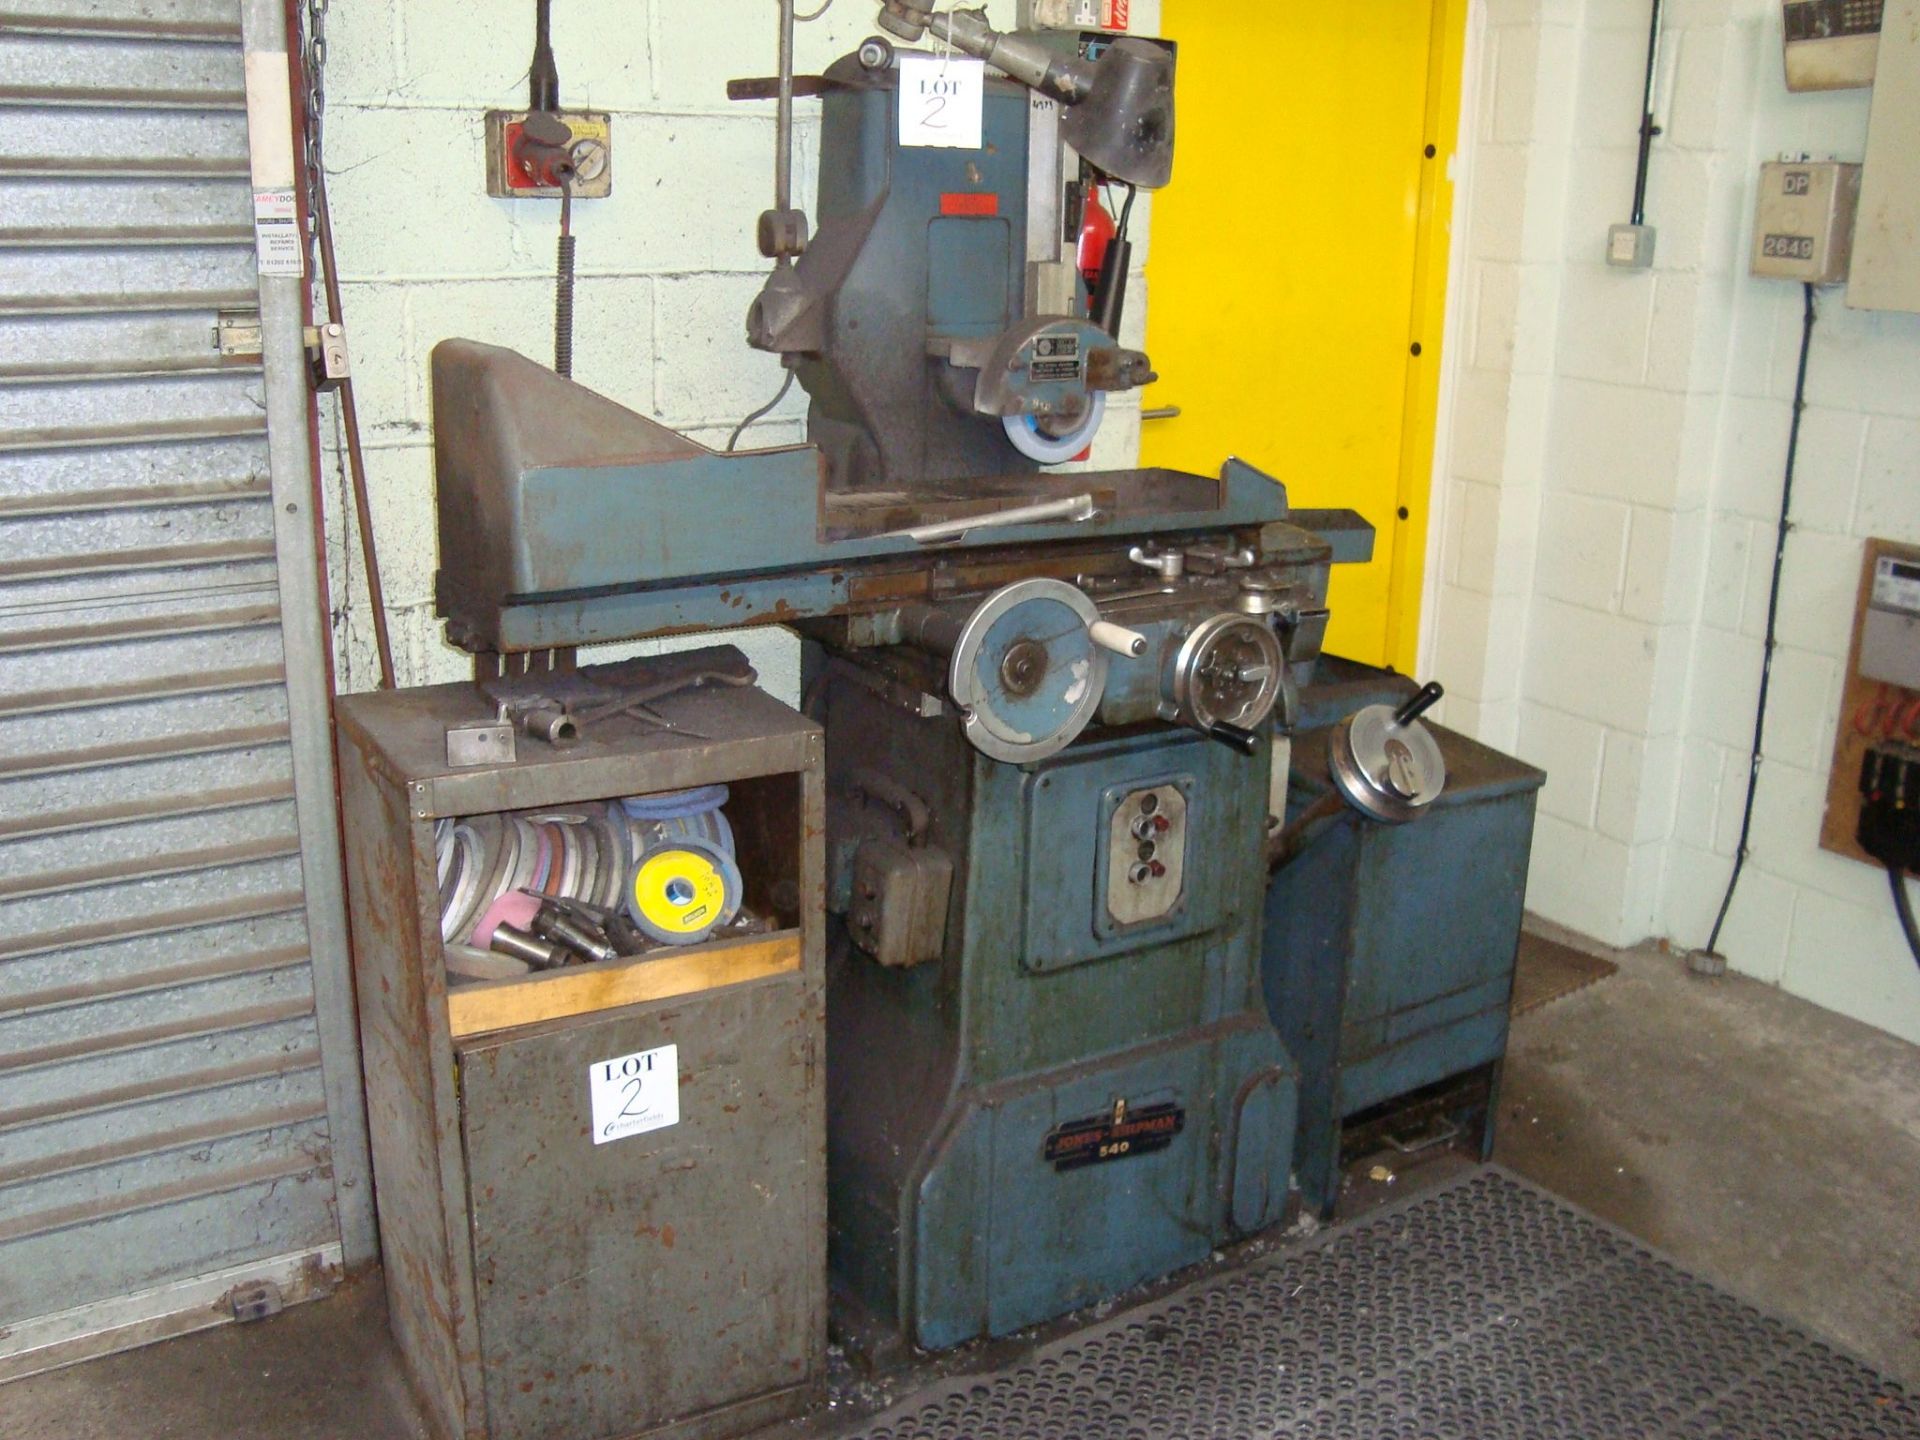 A Jones and Shipman 540 6"x18" horizontal surface grinding machine, with magnetic surface plate, - Image 2 of 3